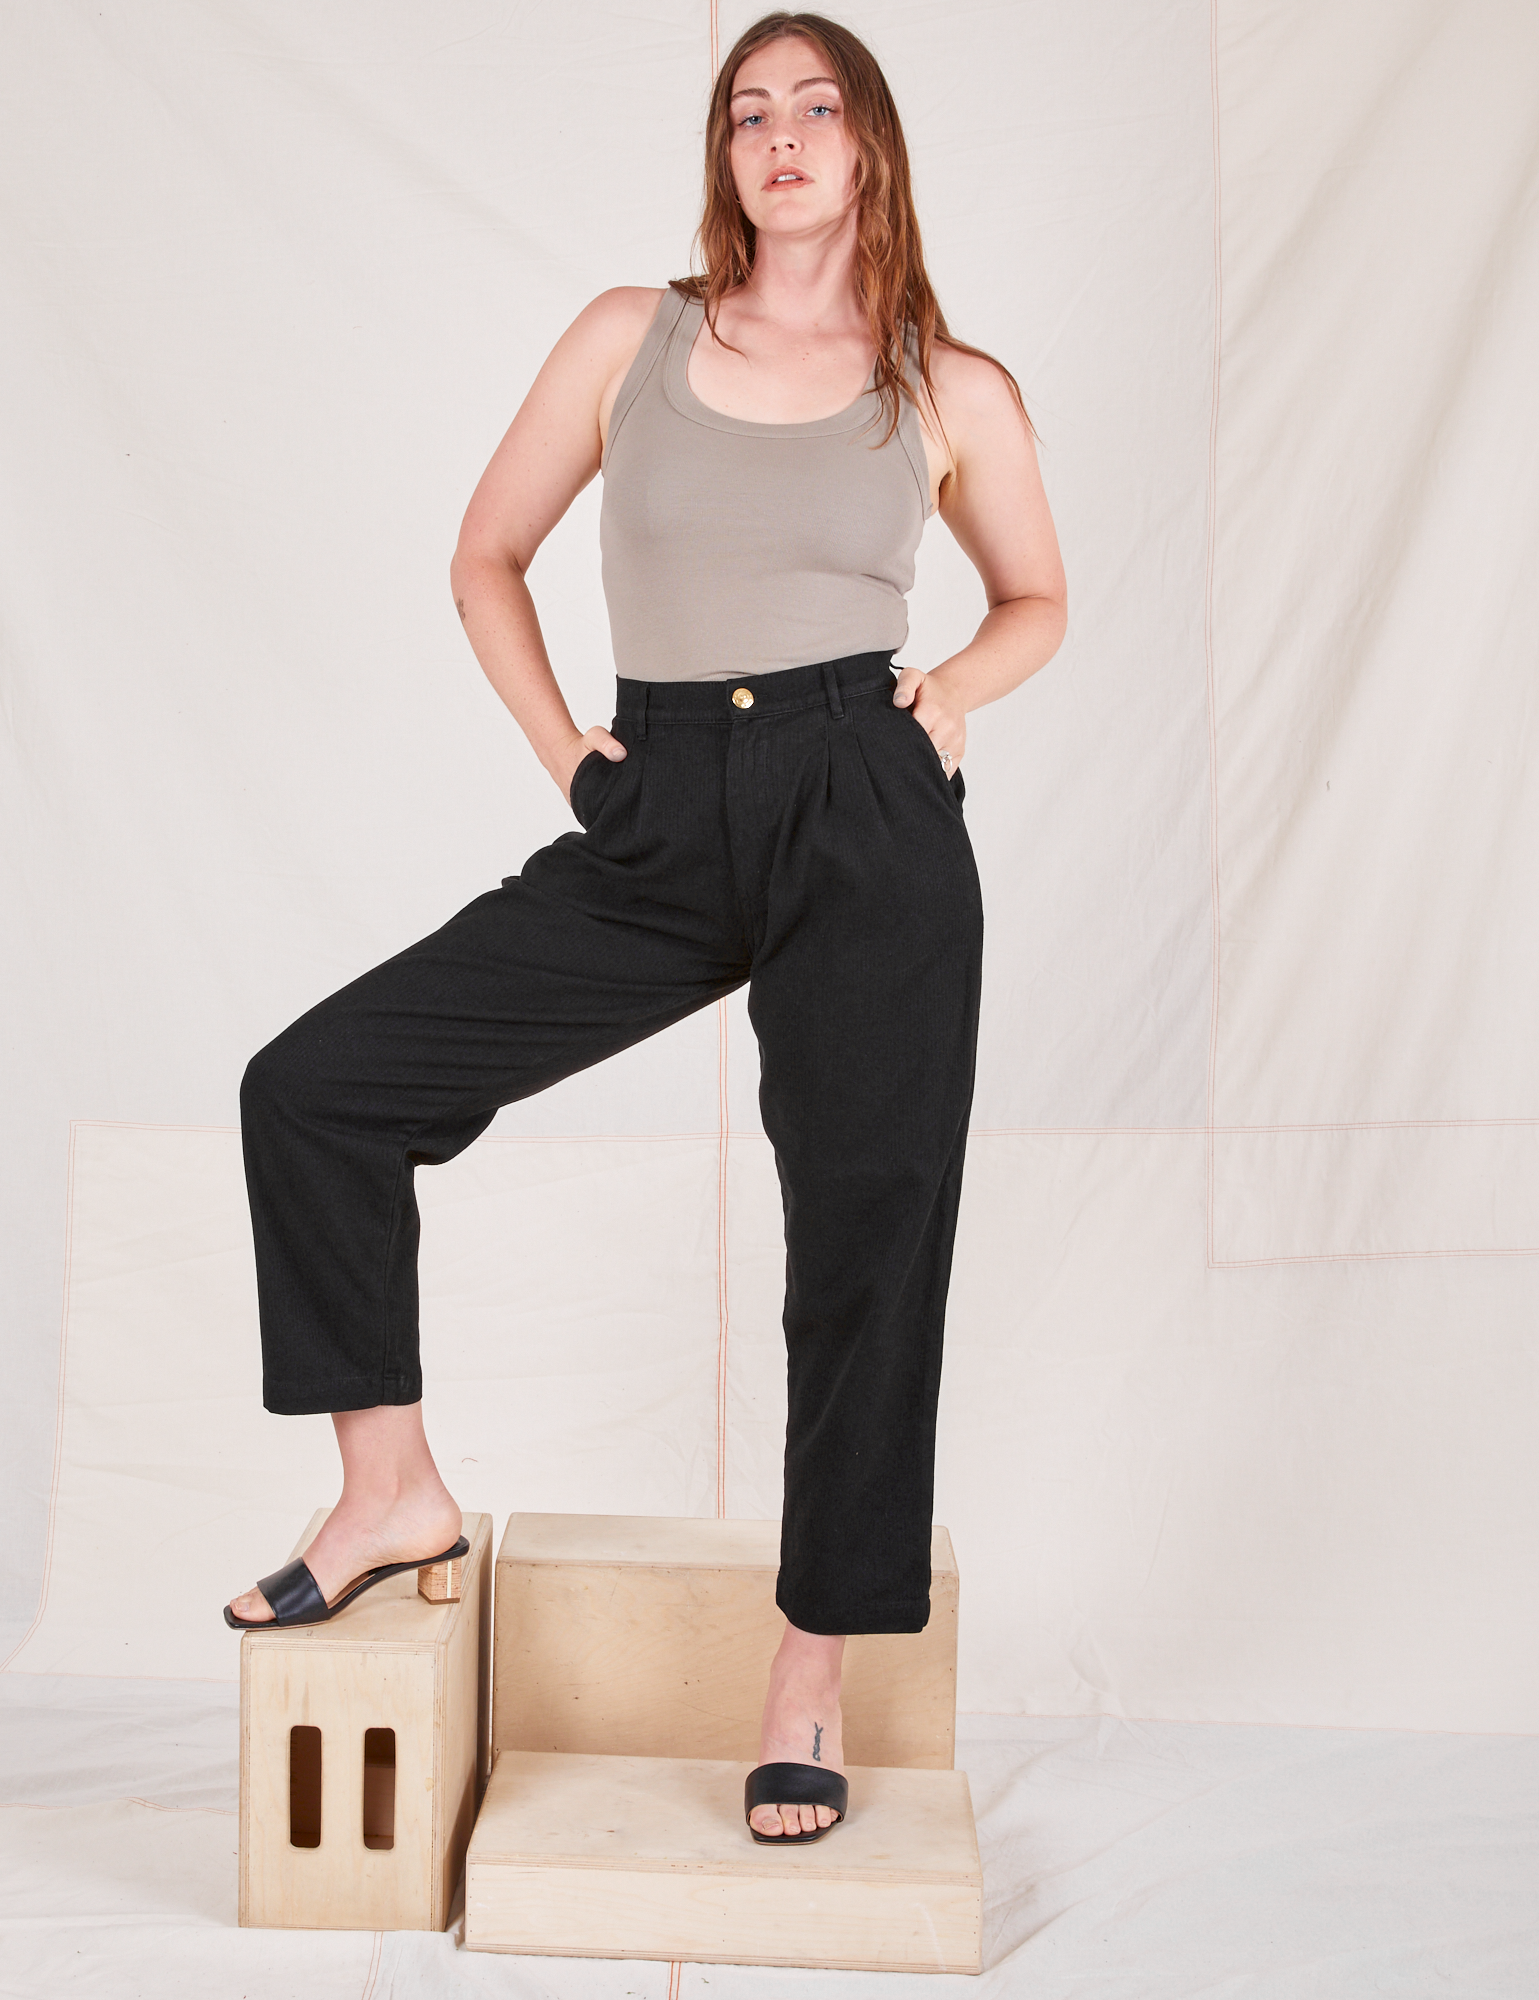 Allison is 5&#39;10&quot; and wearing S Heritage Trousers in Basic Black paired with khaki grey Tank Top